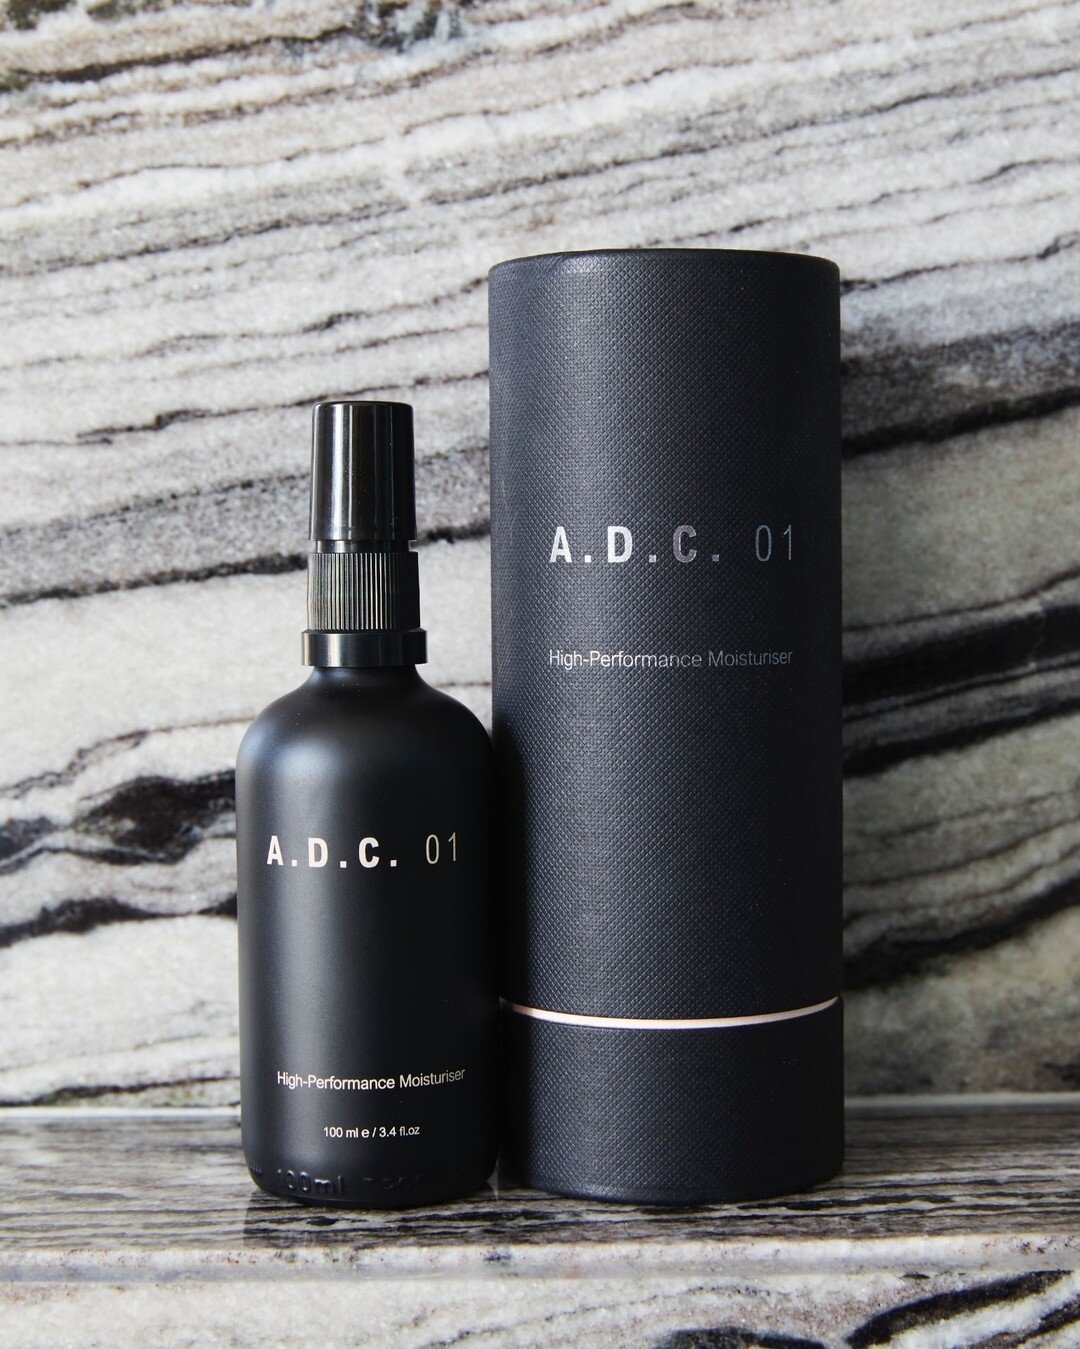 Do you want a high-performance multi-functional product that will make your life EASIER? 

A.D.C.01 Moisturiser plumps and tightens your skin, evens out skin tone and leaves skin glowing and feeling deeply nourished. It's the only moisturiser you'll 